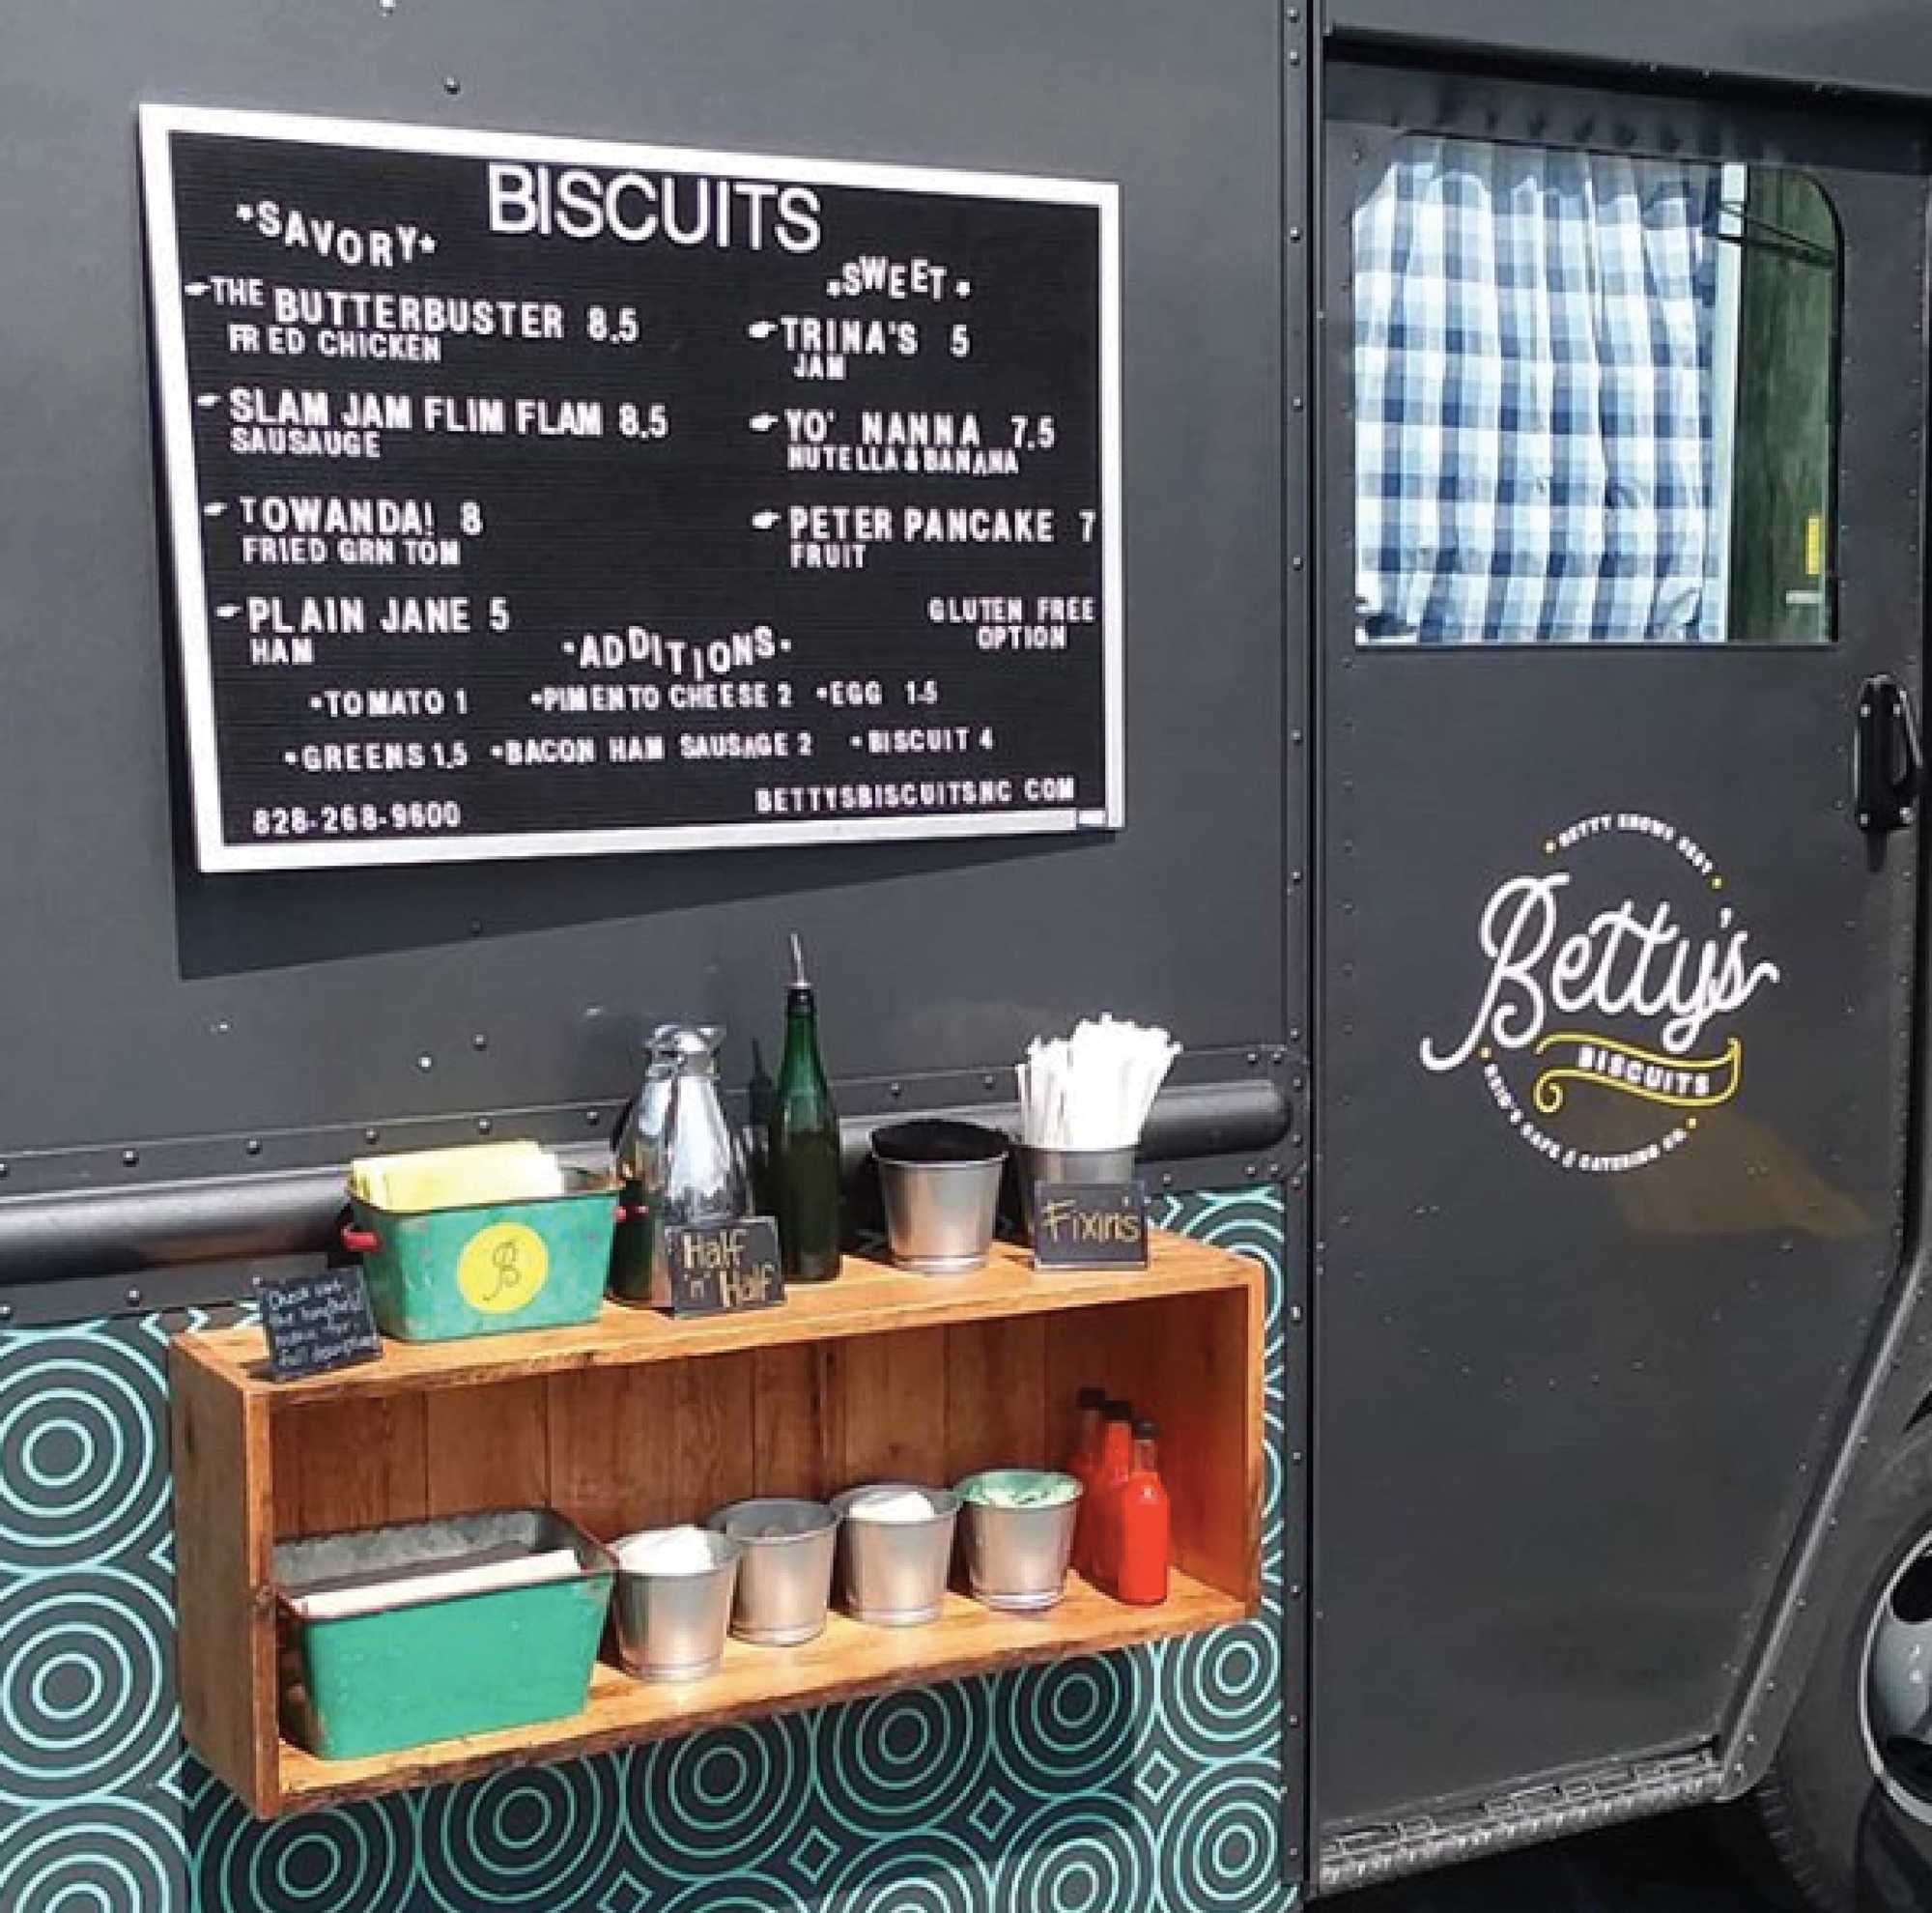 Bettys+Biscuits+menu+displayed+on+the+side+of+their+food+truck.+Bettys+offers+savory+and+sweet+biscuits.